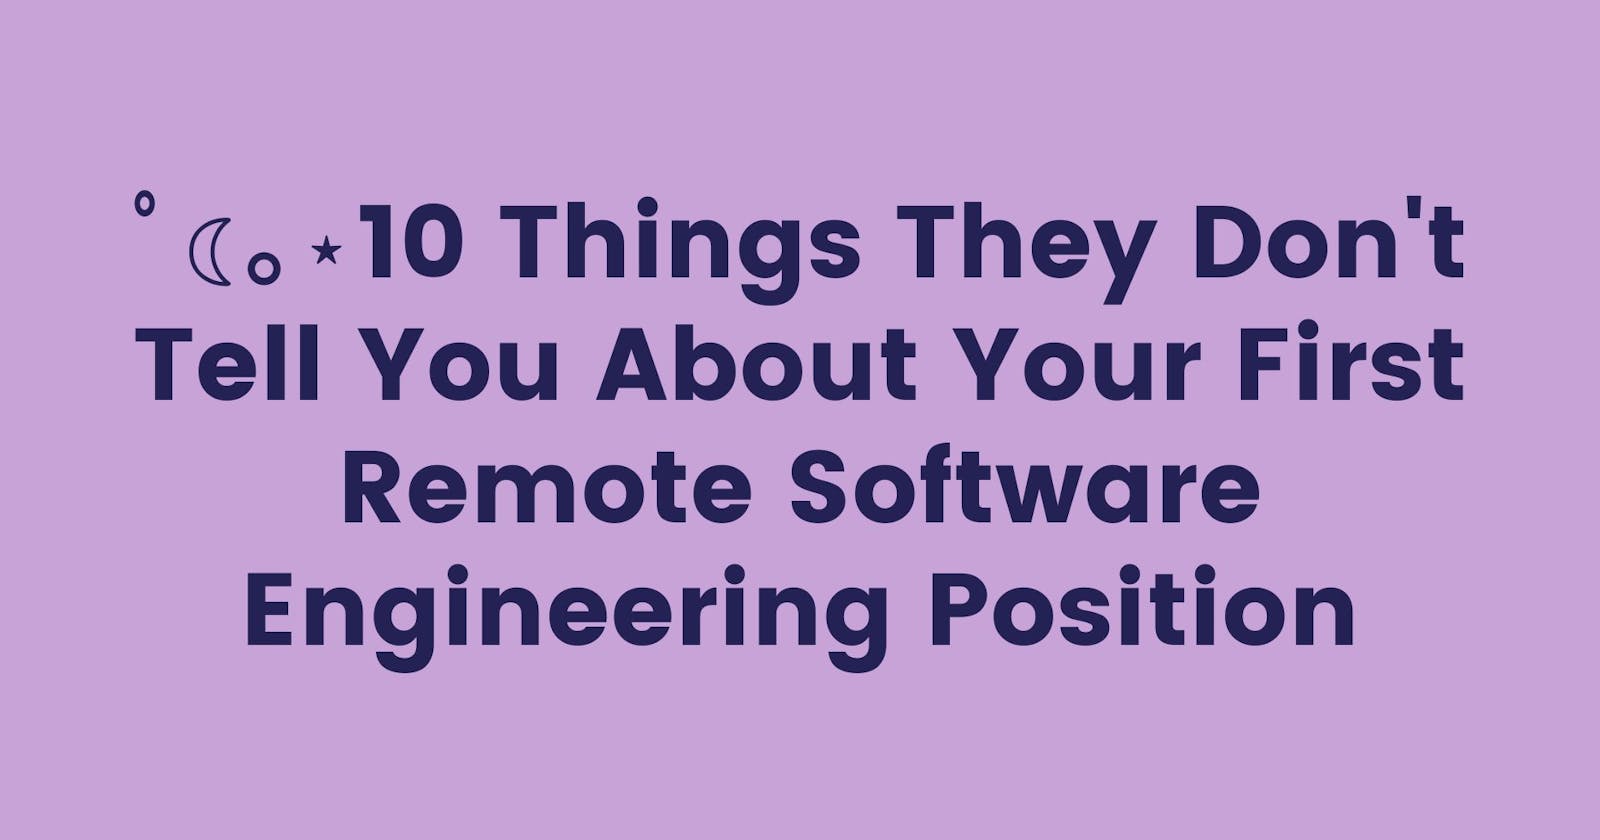 10 Things They Don't Tell You About Your First Remote Software Engineering Position